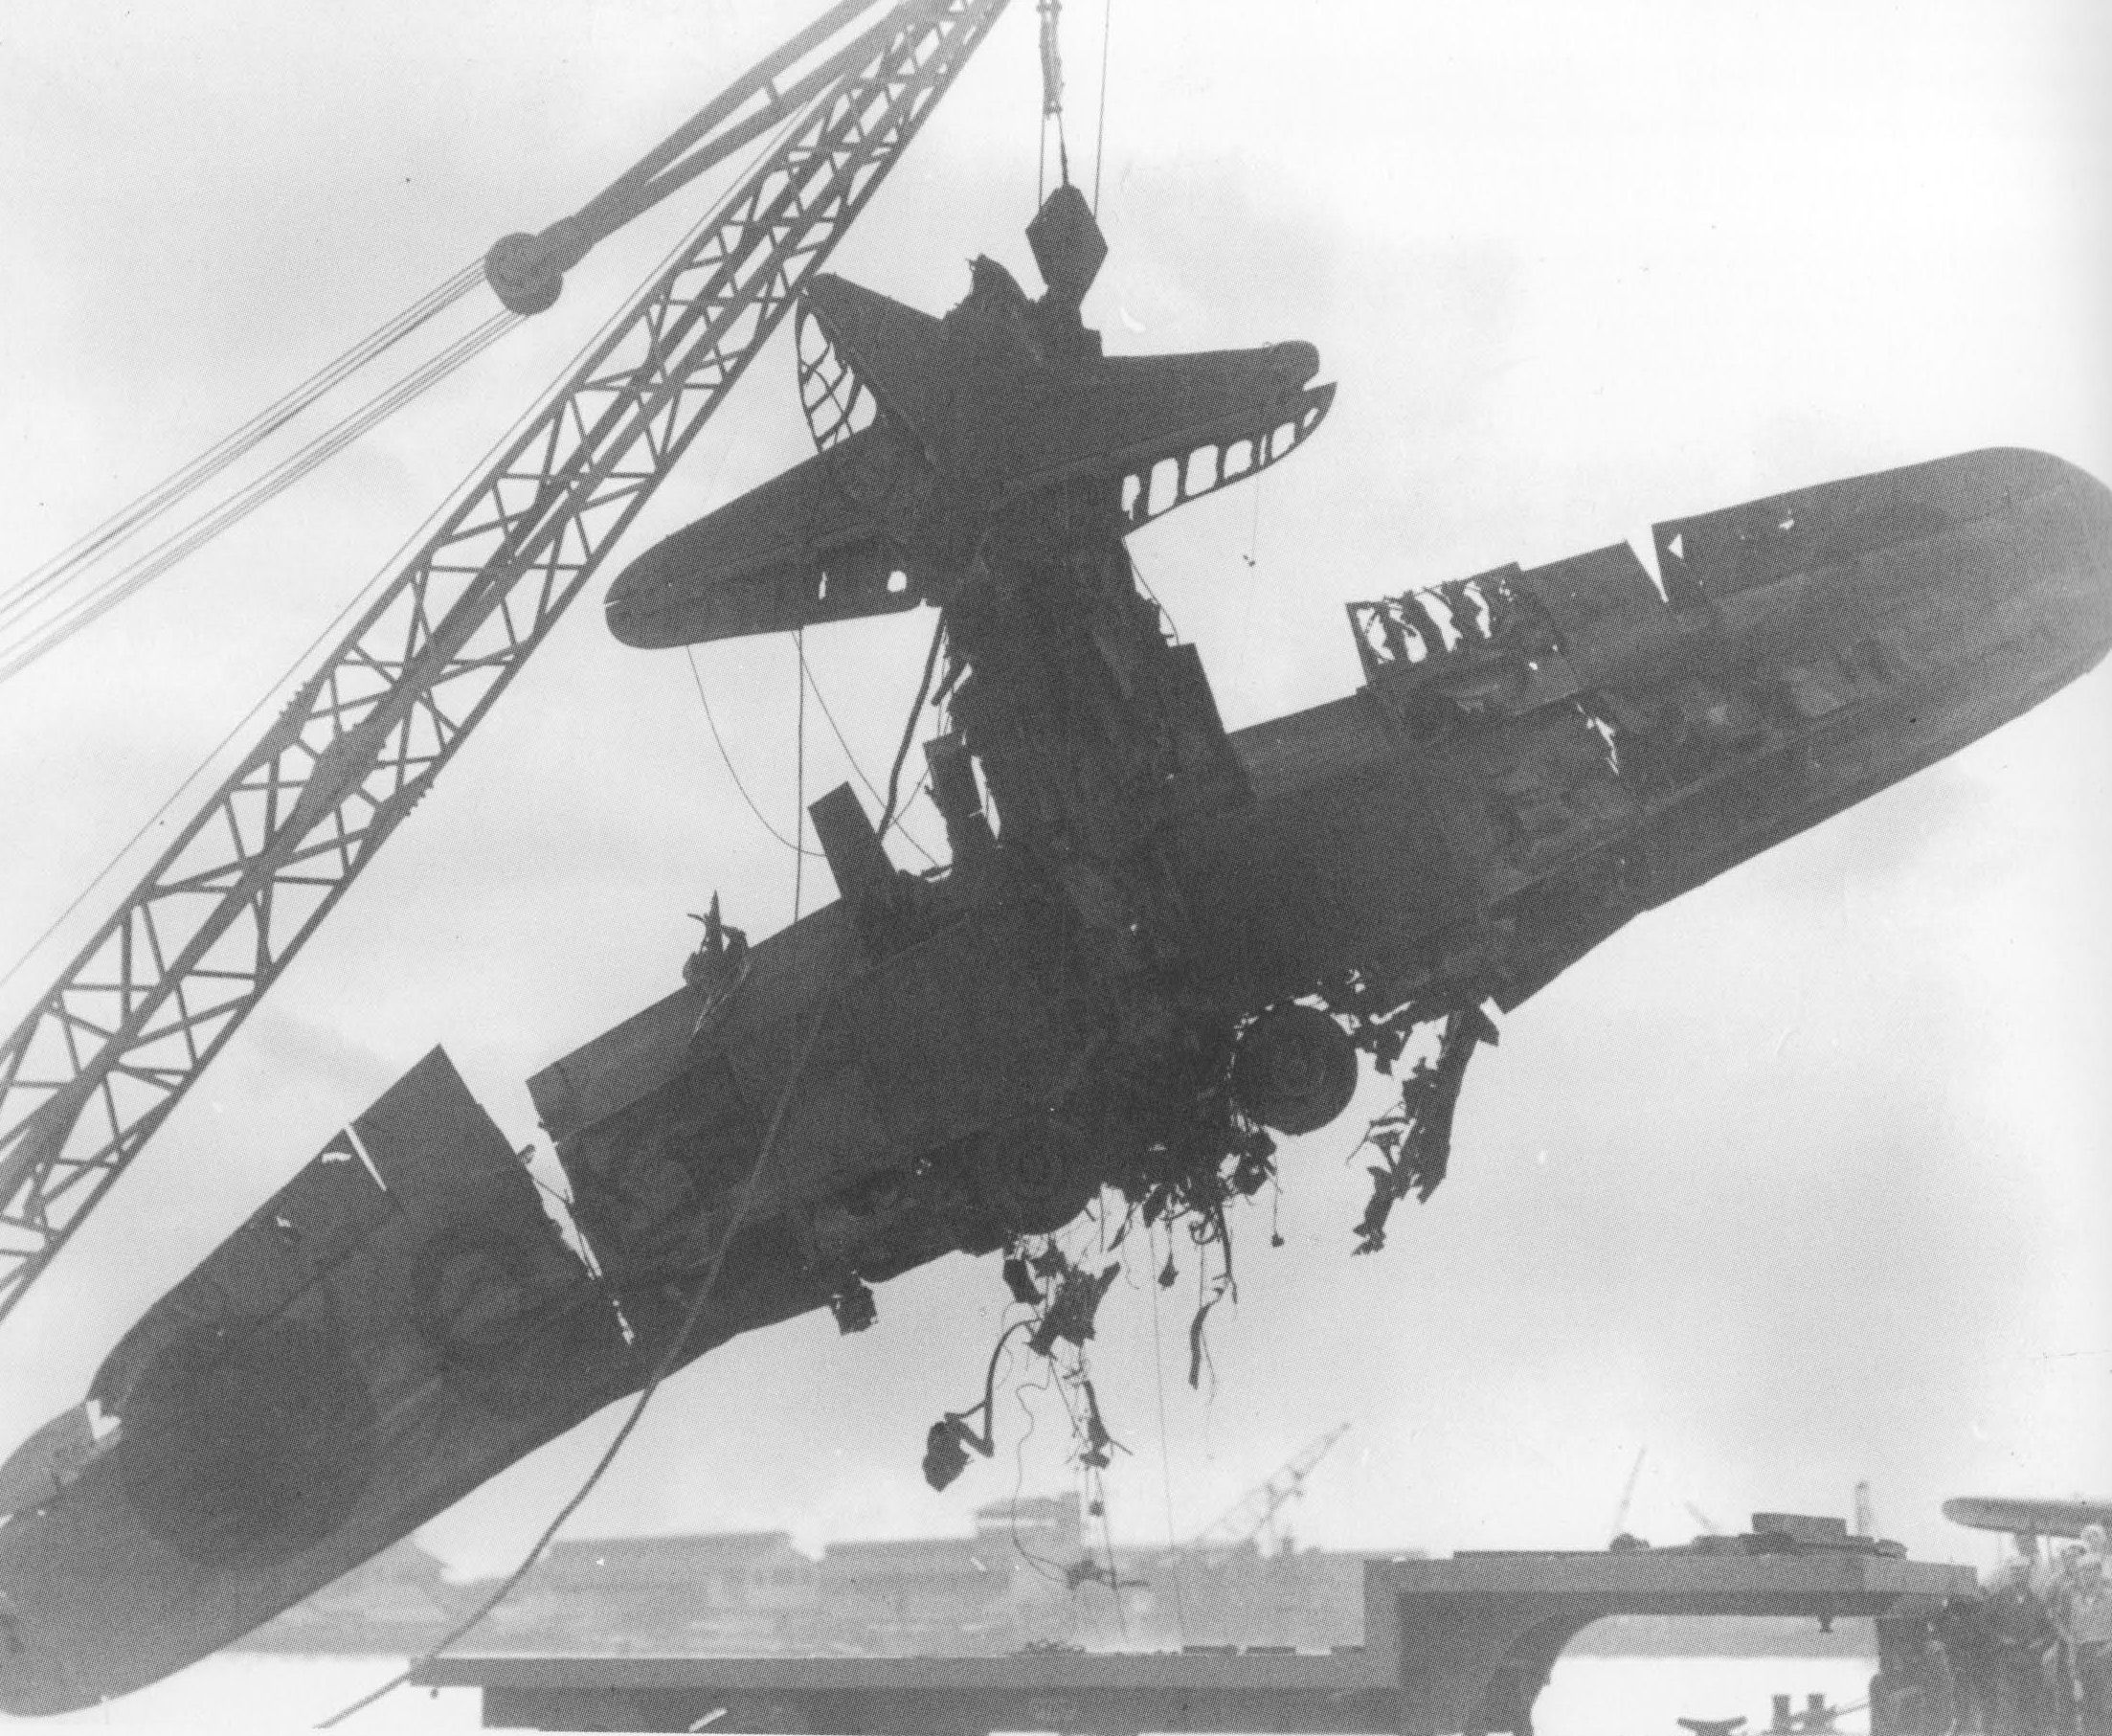 A destroyed Japanese B5N torpedo bomber, flown by Lieutenant Mimori Suzuki of carrier Kaga, being recovered by the Americans in US Territory of Hawaii, Dec 1941